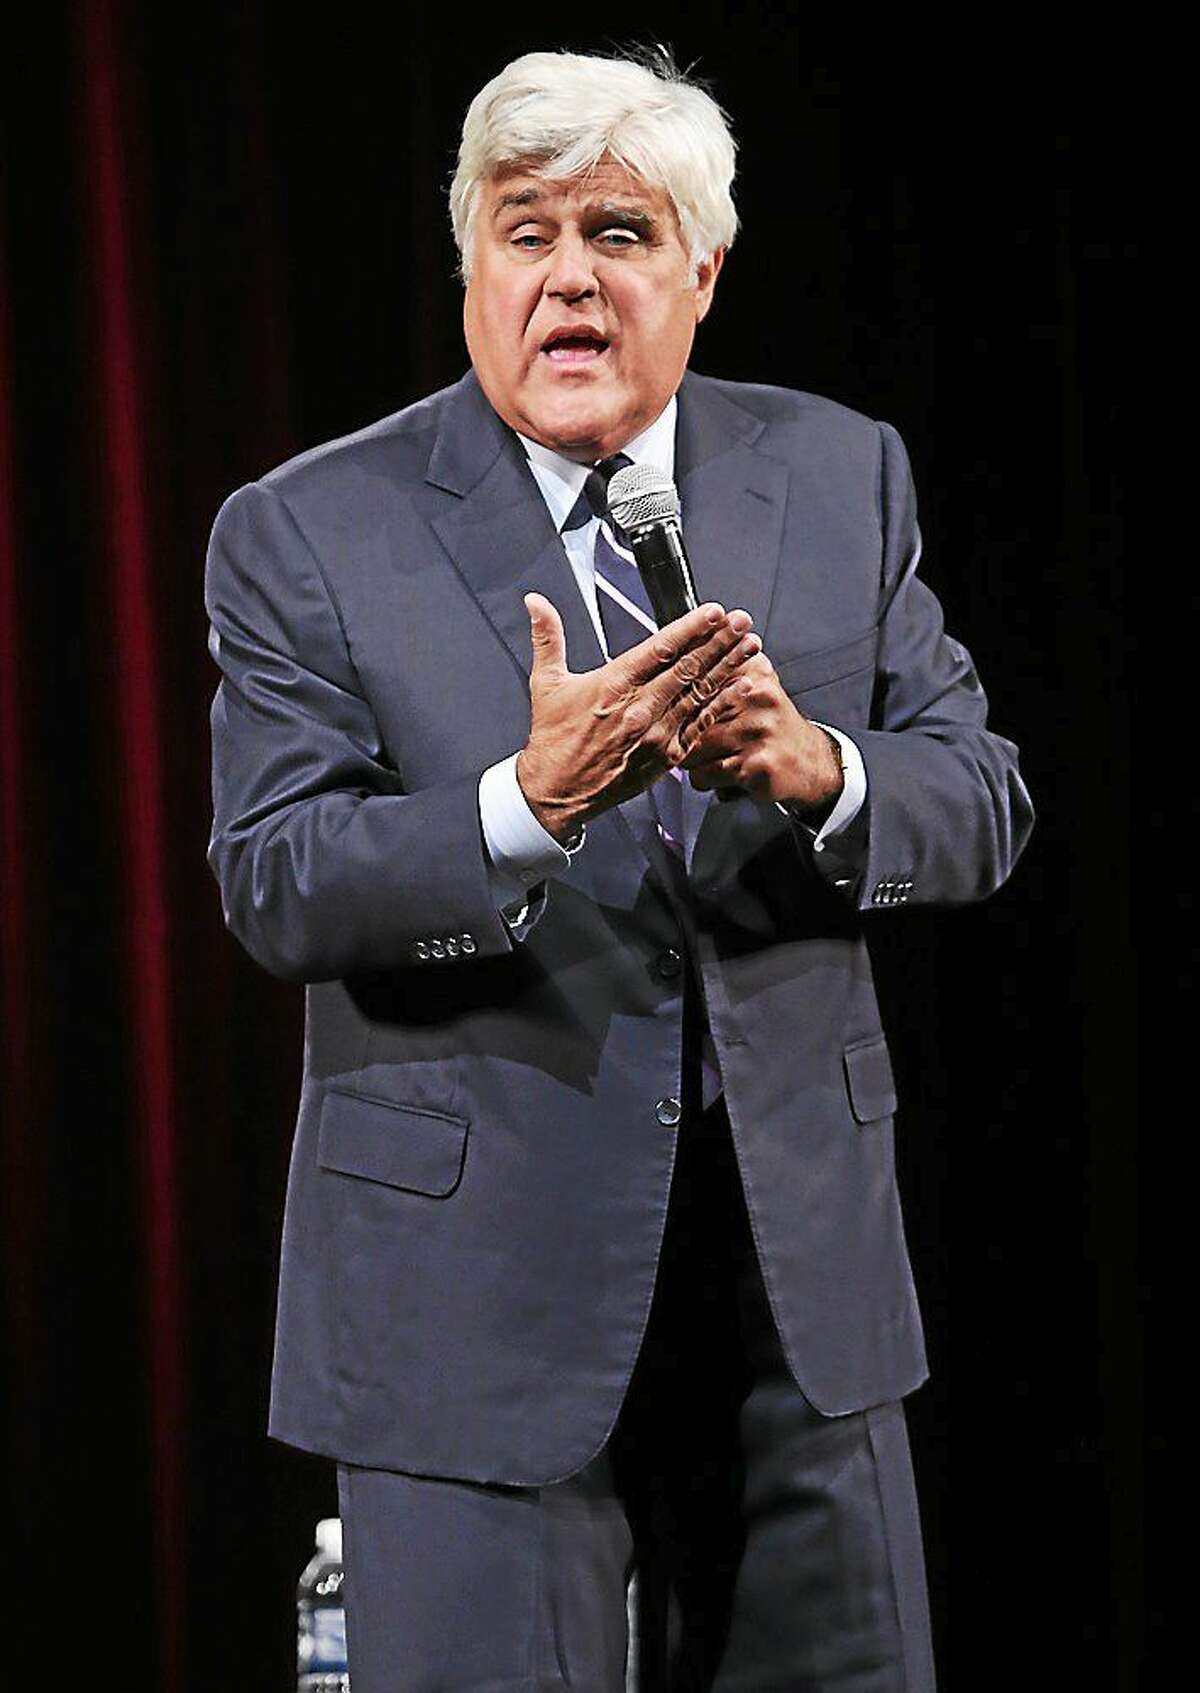 Photo by John Atashian Comedian and television host Jay Leno is shown performing on stage during his sold out concert appearance at the Jorgenson Center for the Performing Arts in Storrs on Sept. 20.